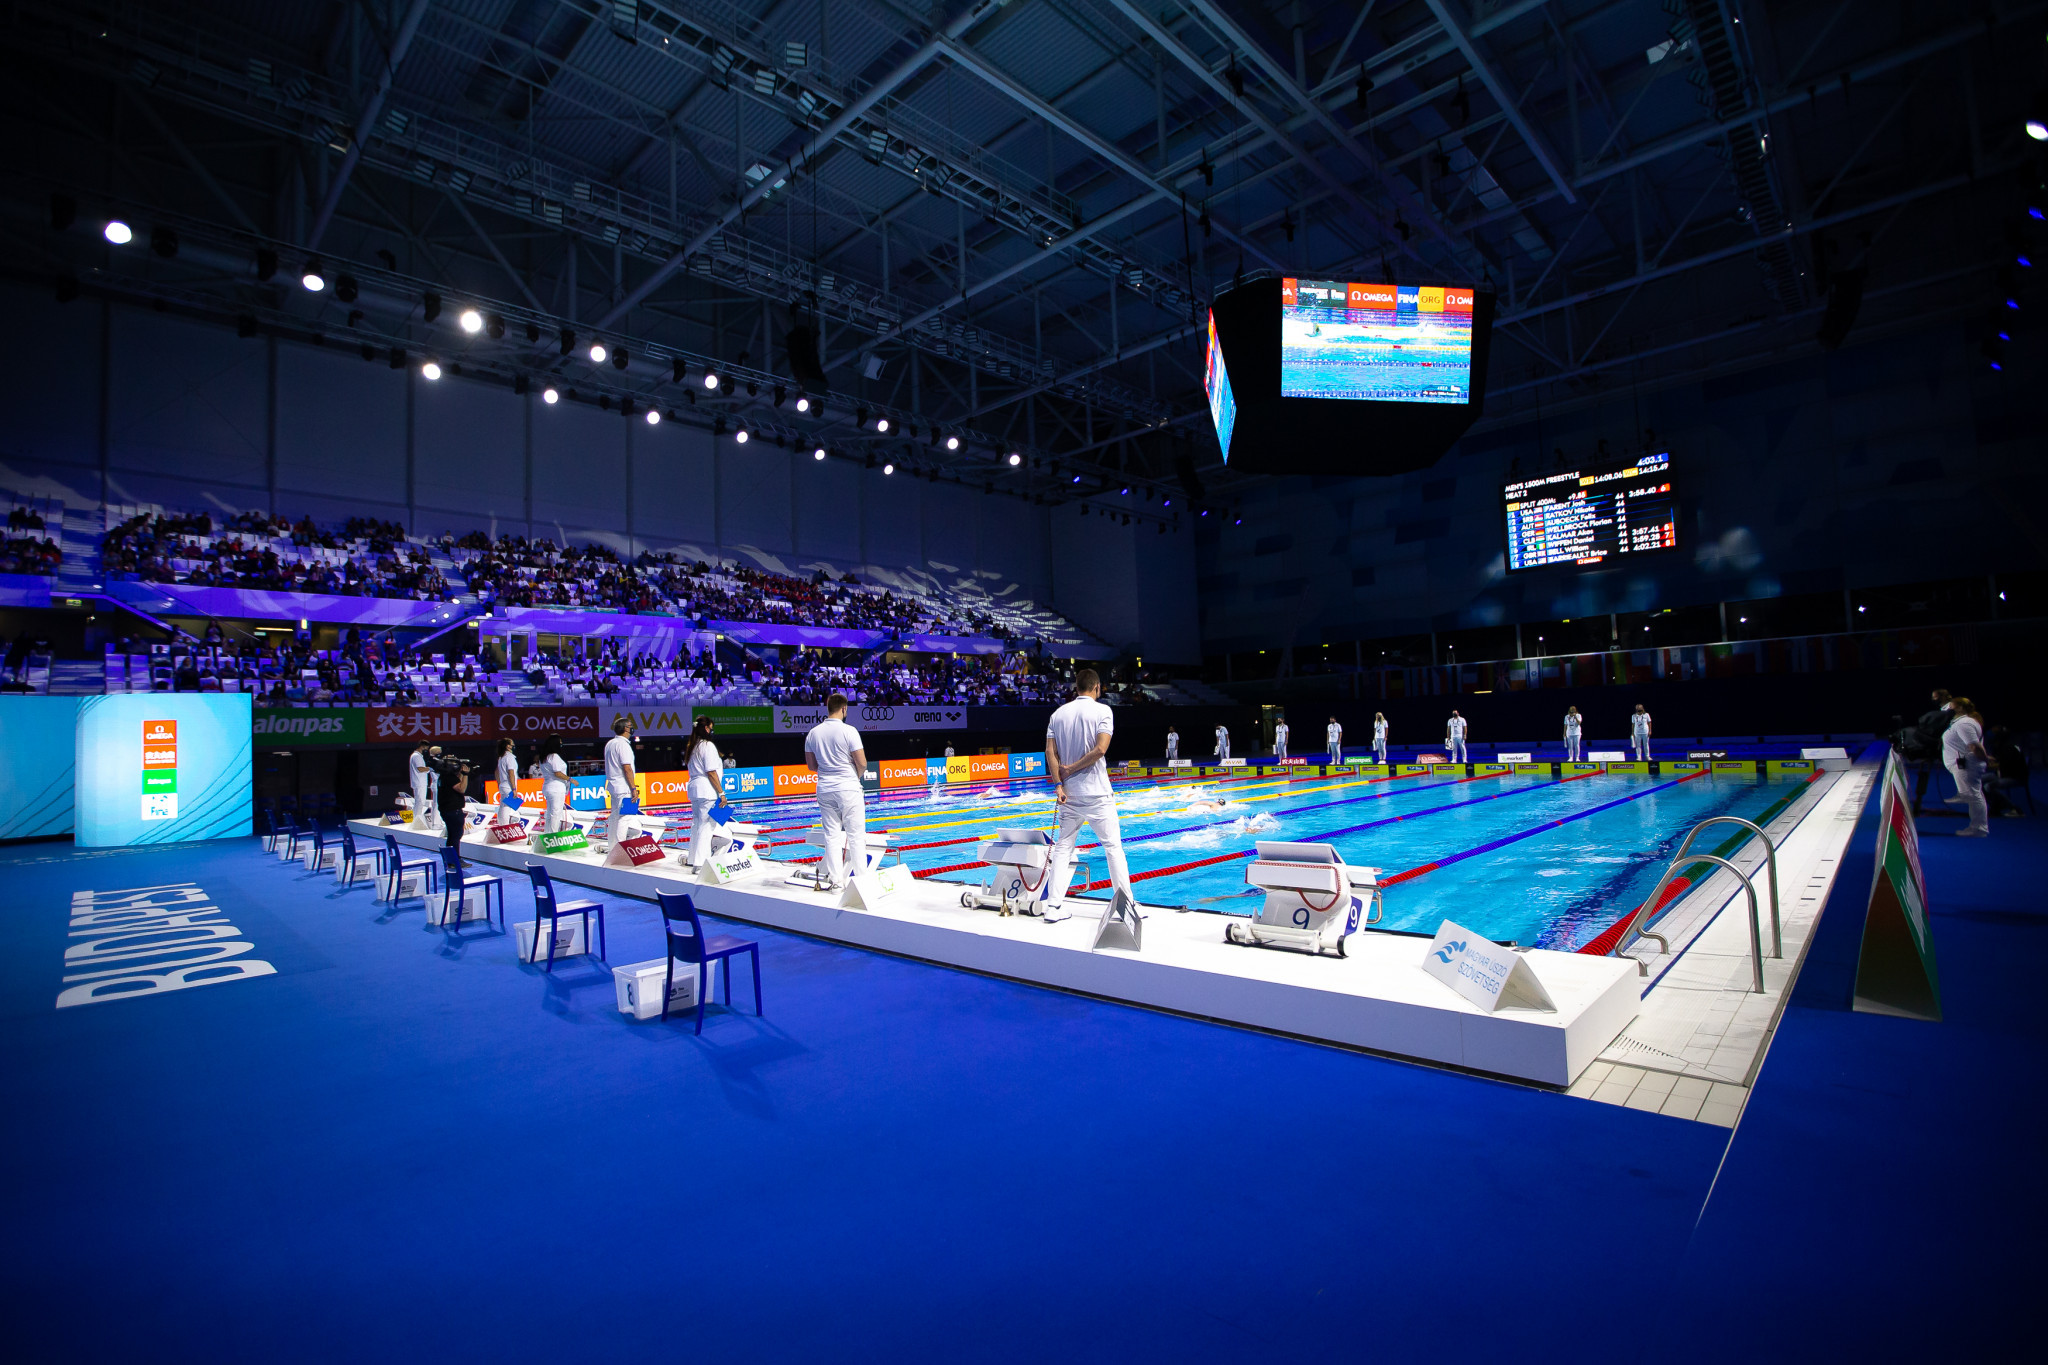 Budapest has been awarded an extraordinary edition of the World Aquatics Championships by FINA ©Getty Images